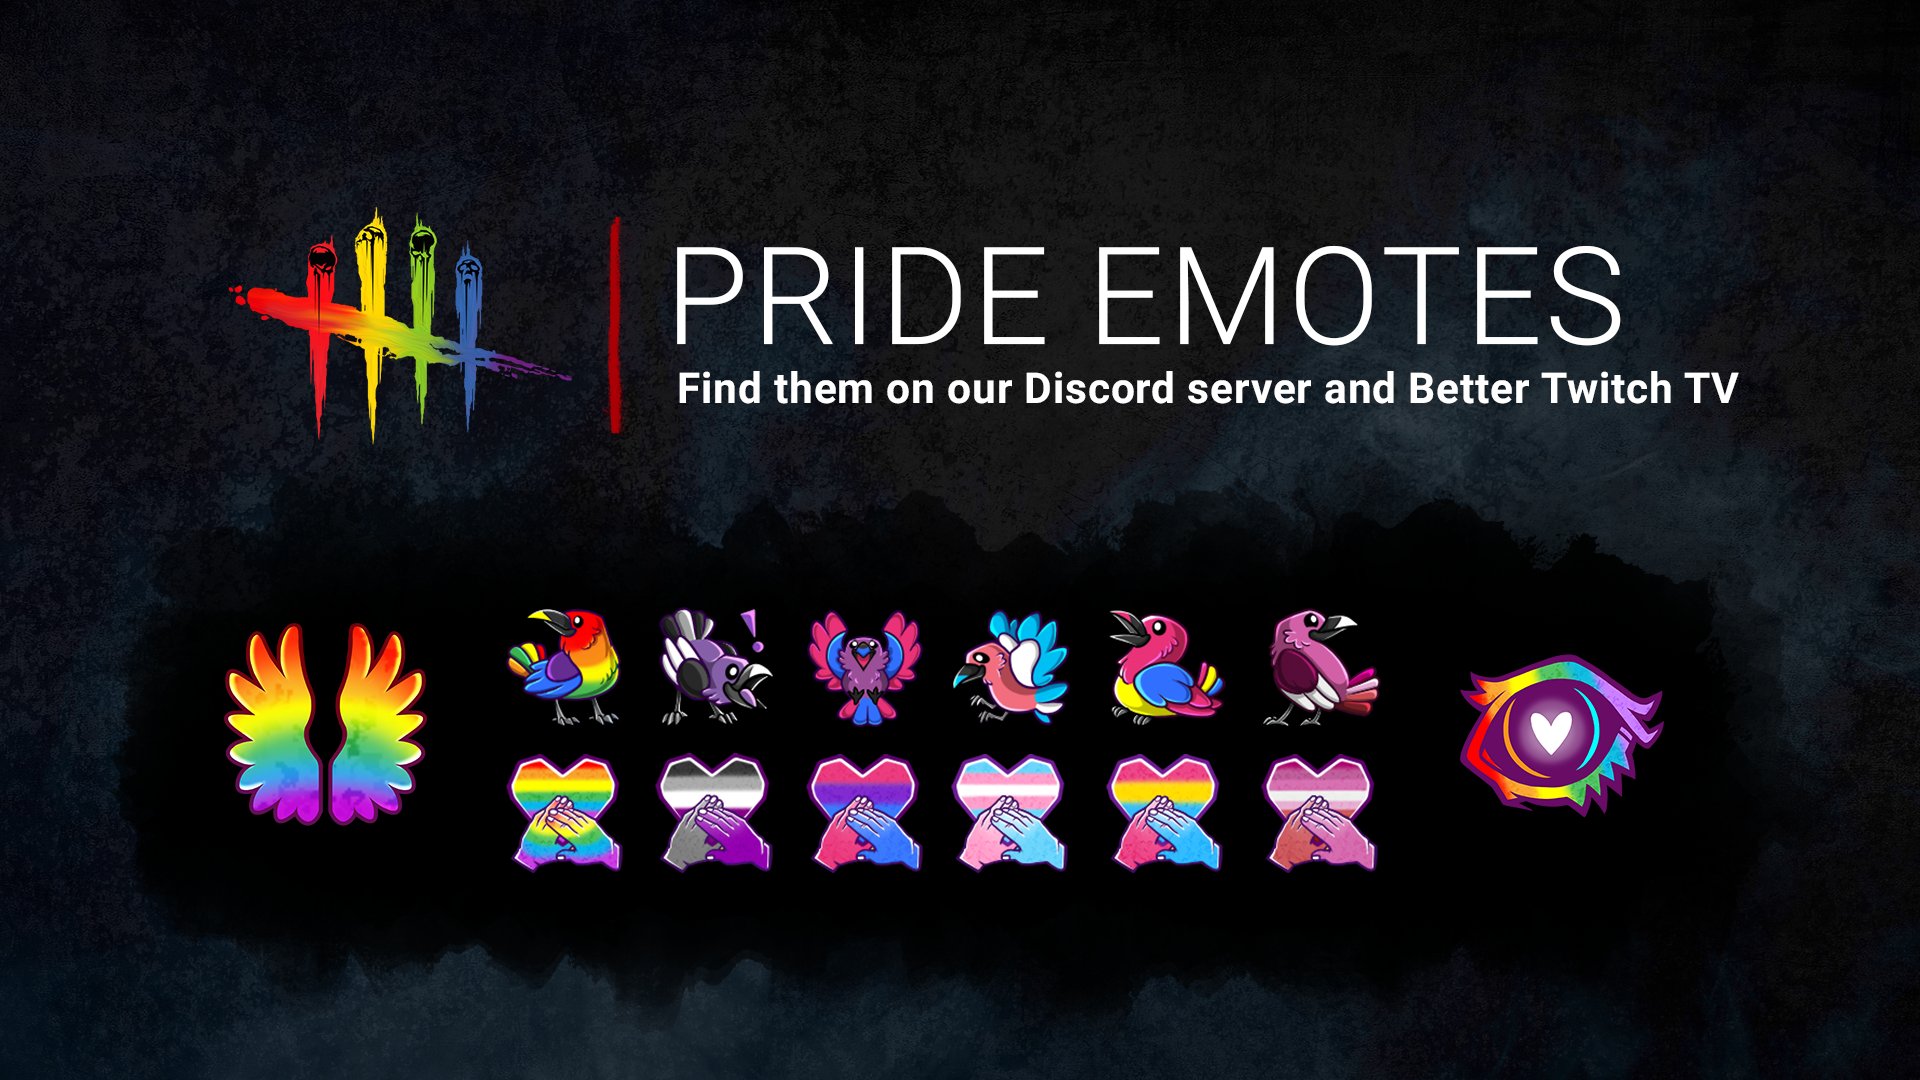 Dead By Daylight Pa Twitter Let S Celebrate Pride Together With A Brand New Set Of Emotes Available On Better Twitch Tv We Ve Made Them Public So You Can Add Them To Your